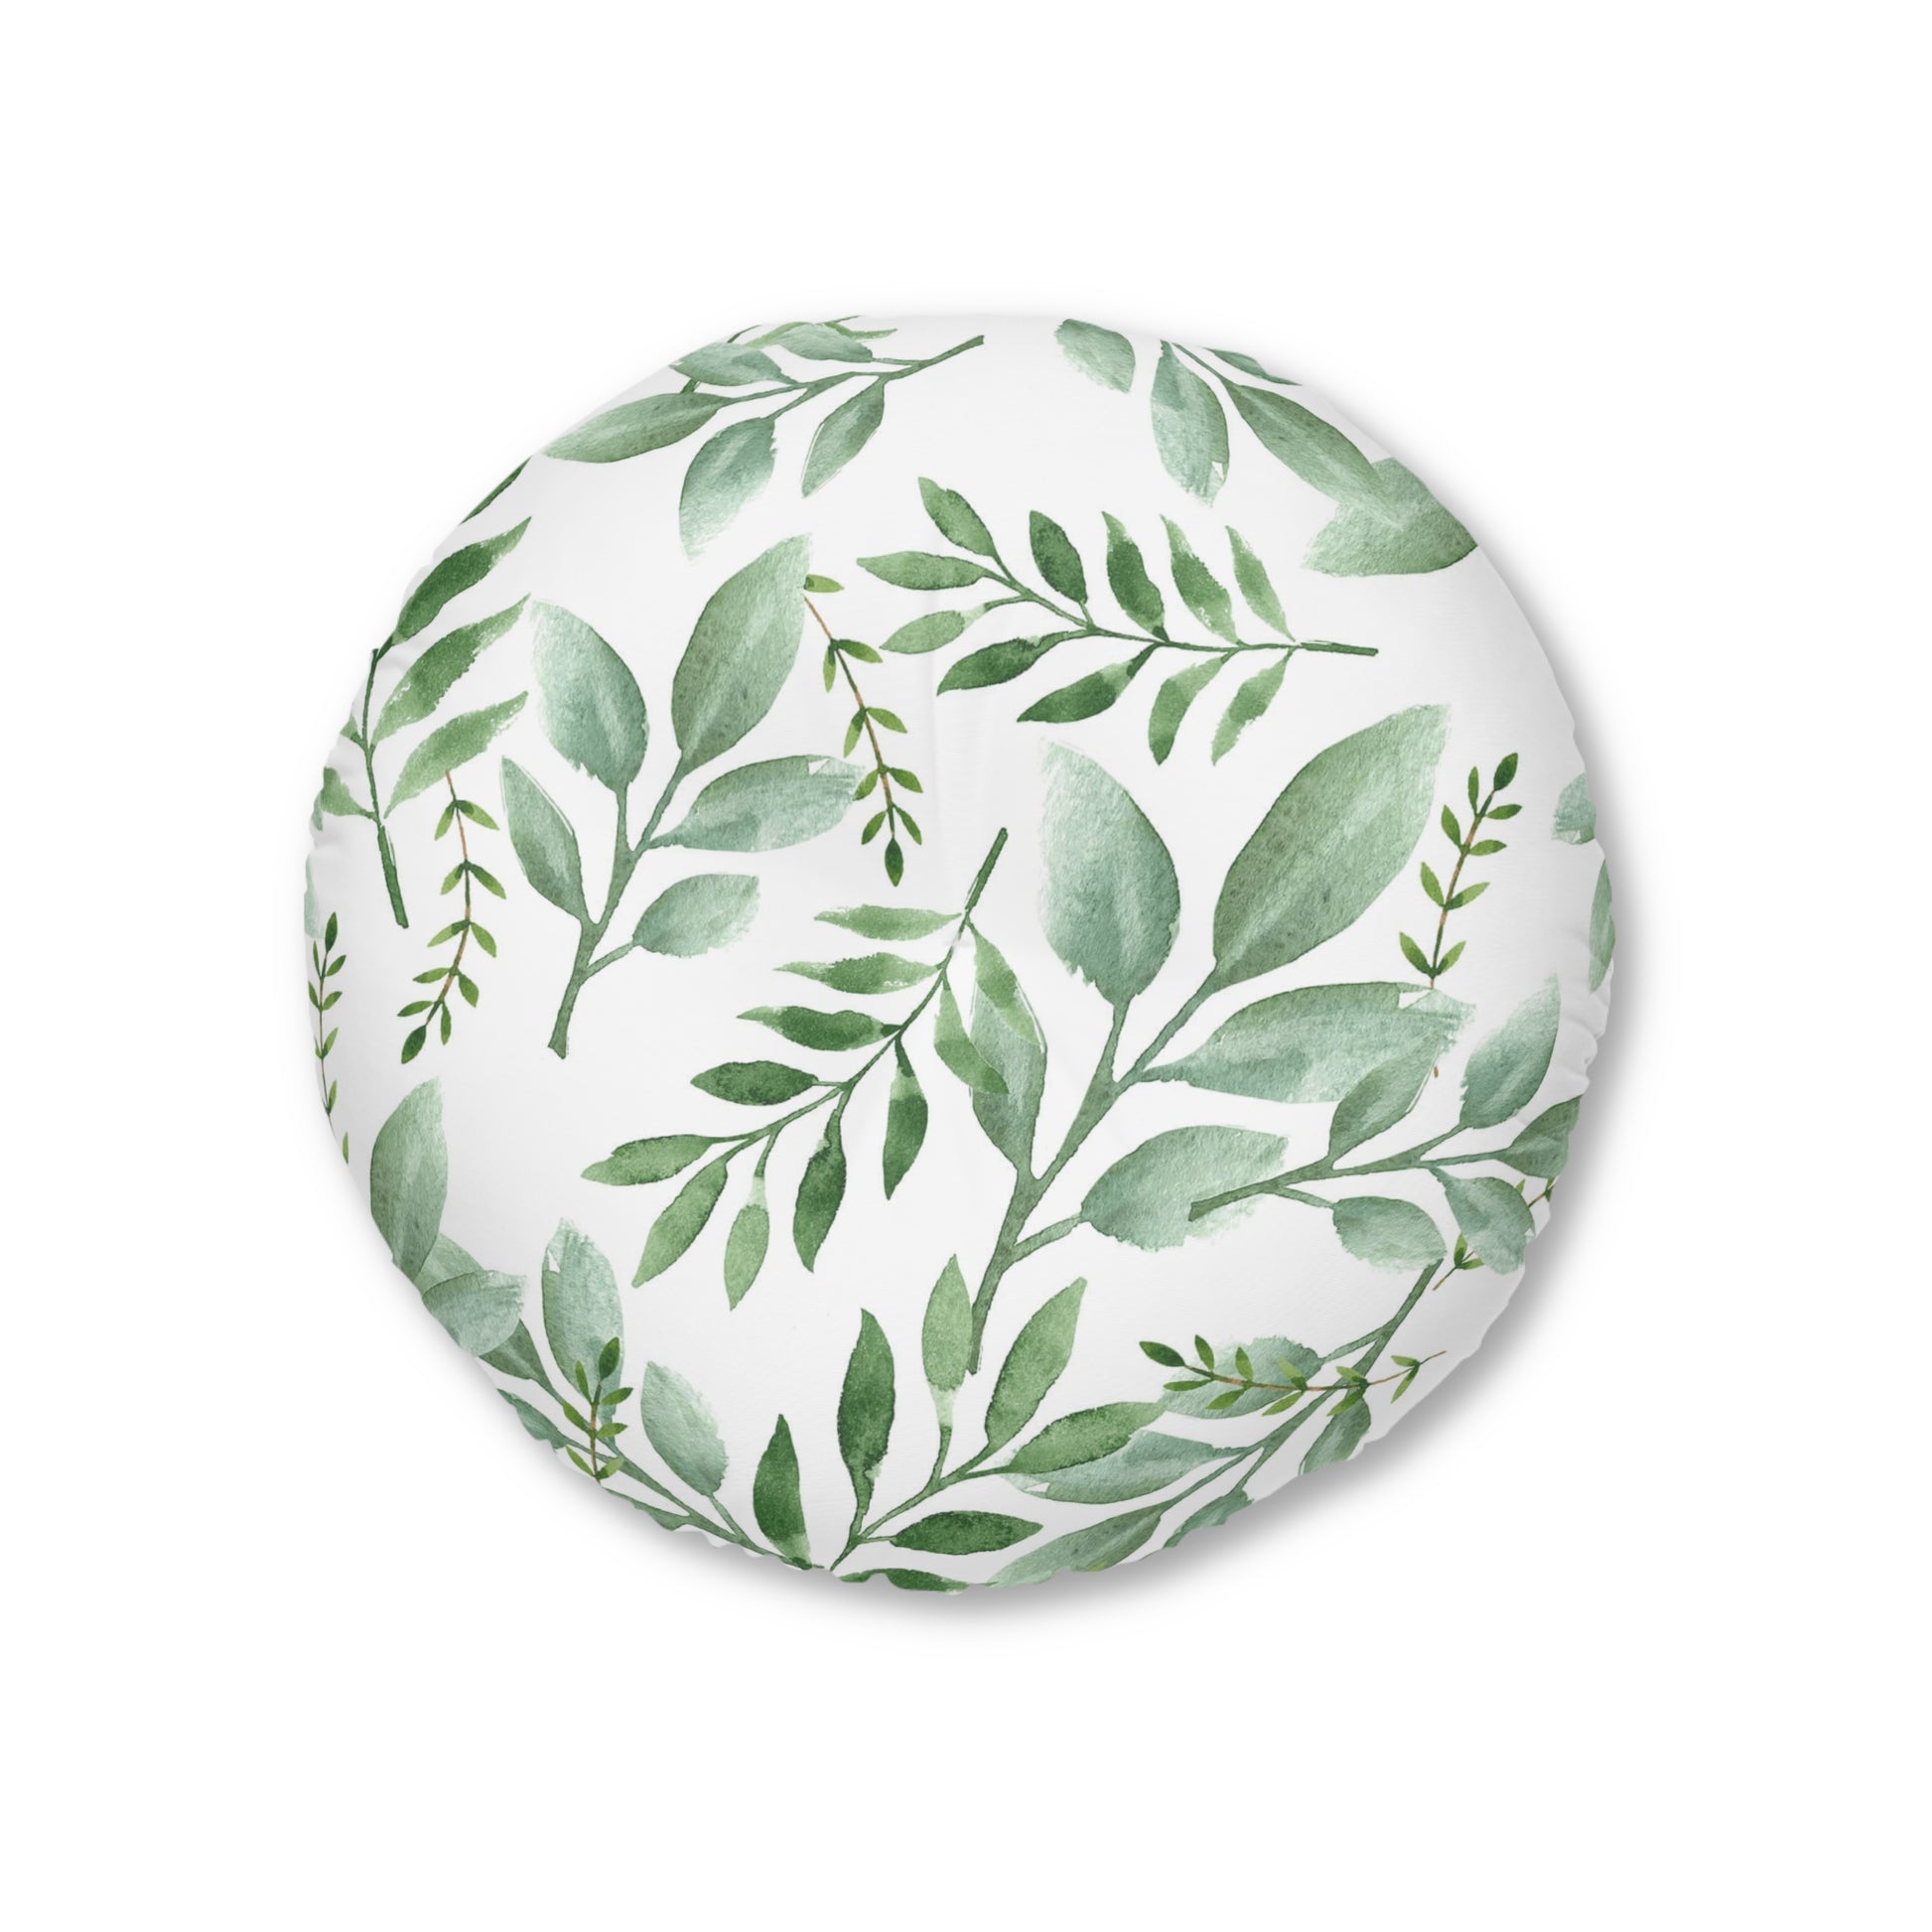 Sentence (updated): A Printify Round Tufted Floor-Pillow covered with a pattern of green botanical design leaves.